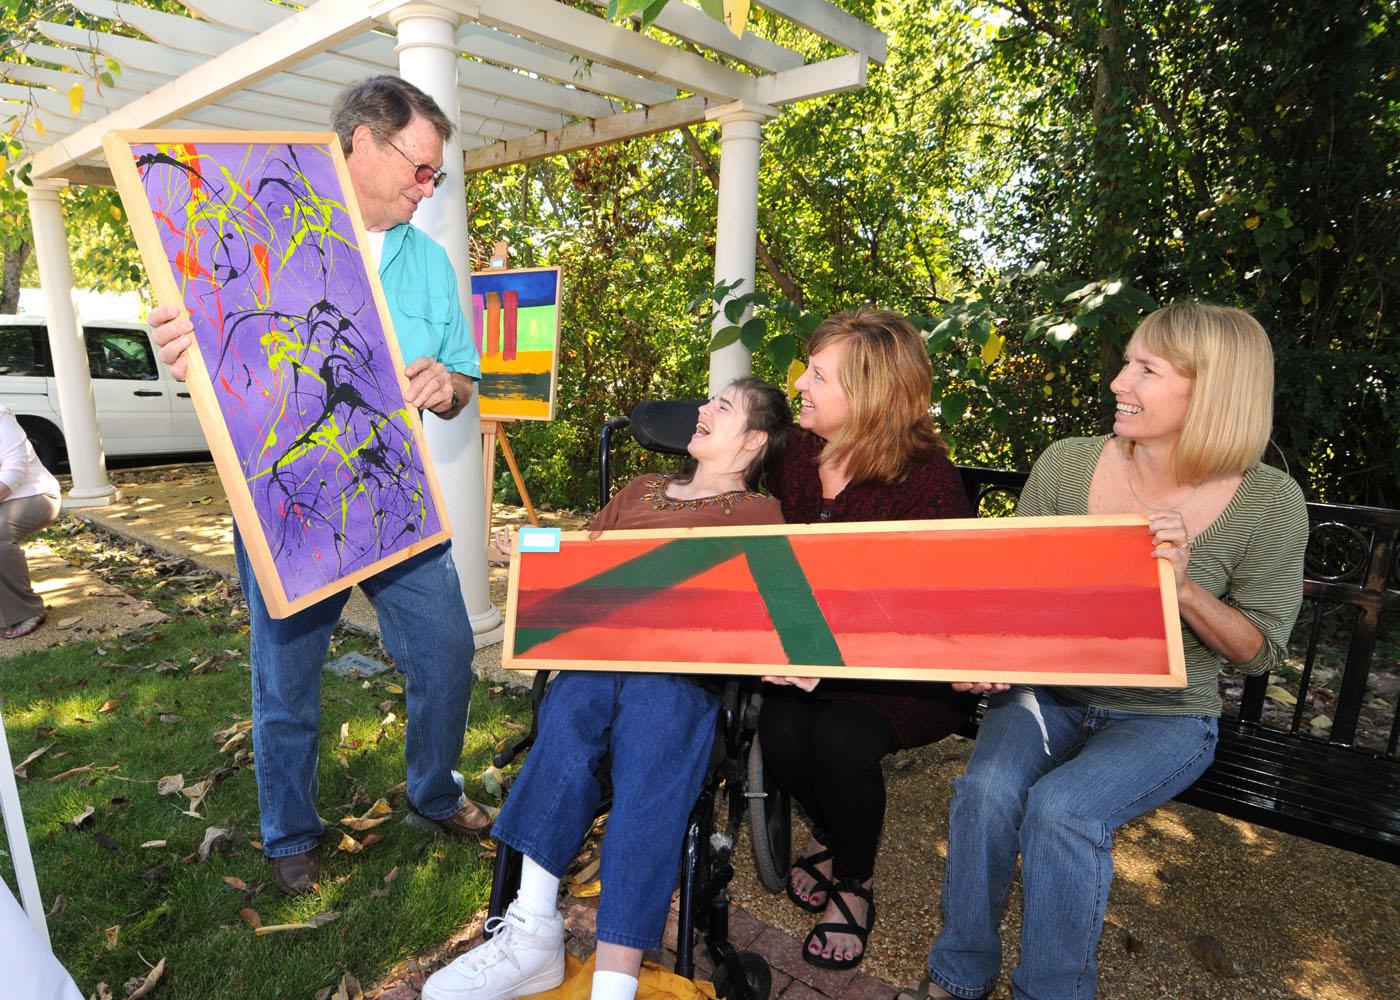 Chickasaw County Master Gardener President John Walden, left, visits with "EXPRESS Yourself" artist Amanda Williams of Ackerman during the Art in the Park event in downtown Houston. Judy Duncan and Barbara Boydston of the T.K. Martin Center at Mississippi State University brought artwork and clients to the event, which was co-sponsored by the Master Gardeners, the Mississippi Homemaker Volunteers and the MSU Alumni Association's Chickasaw County chapter. (Photo by Scott Corey)